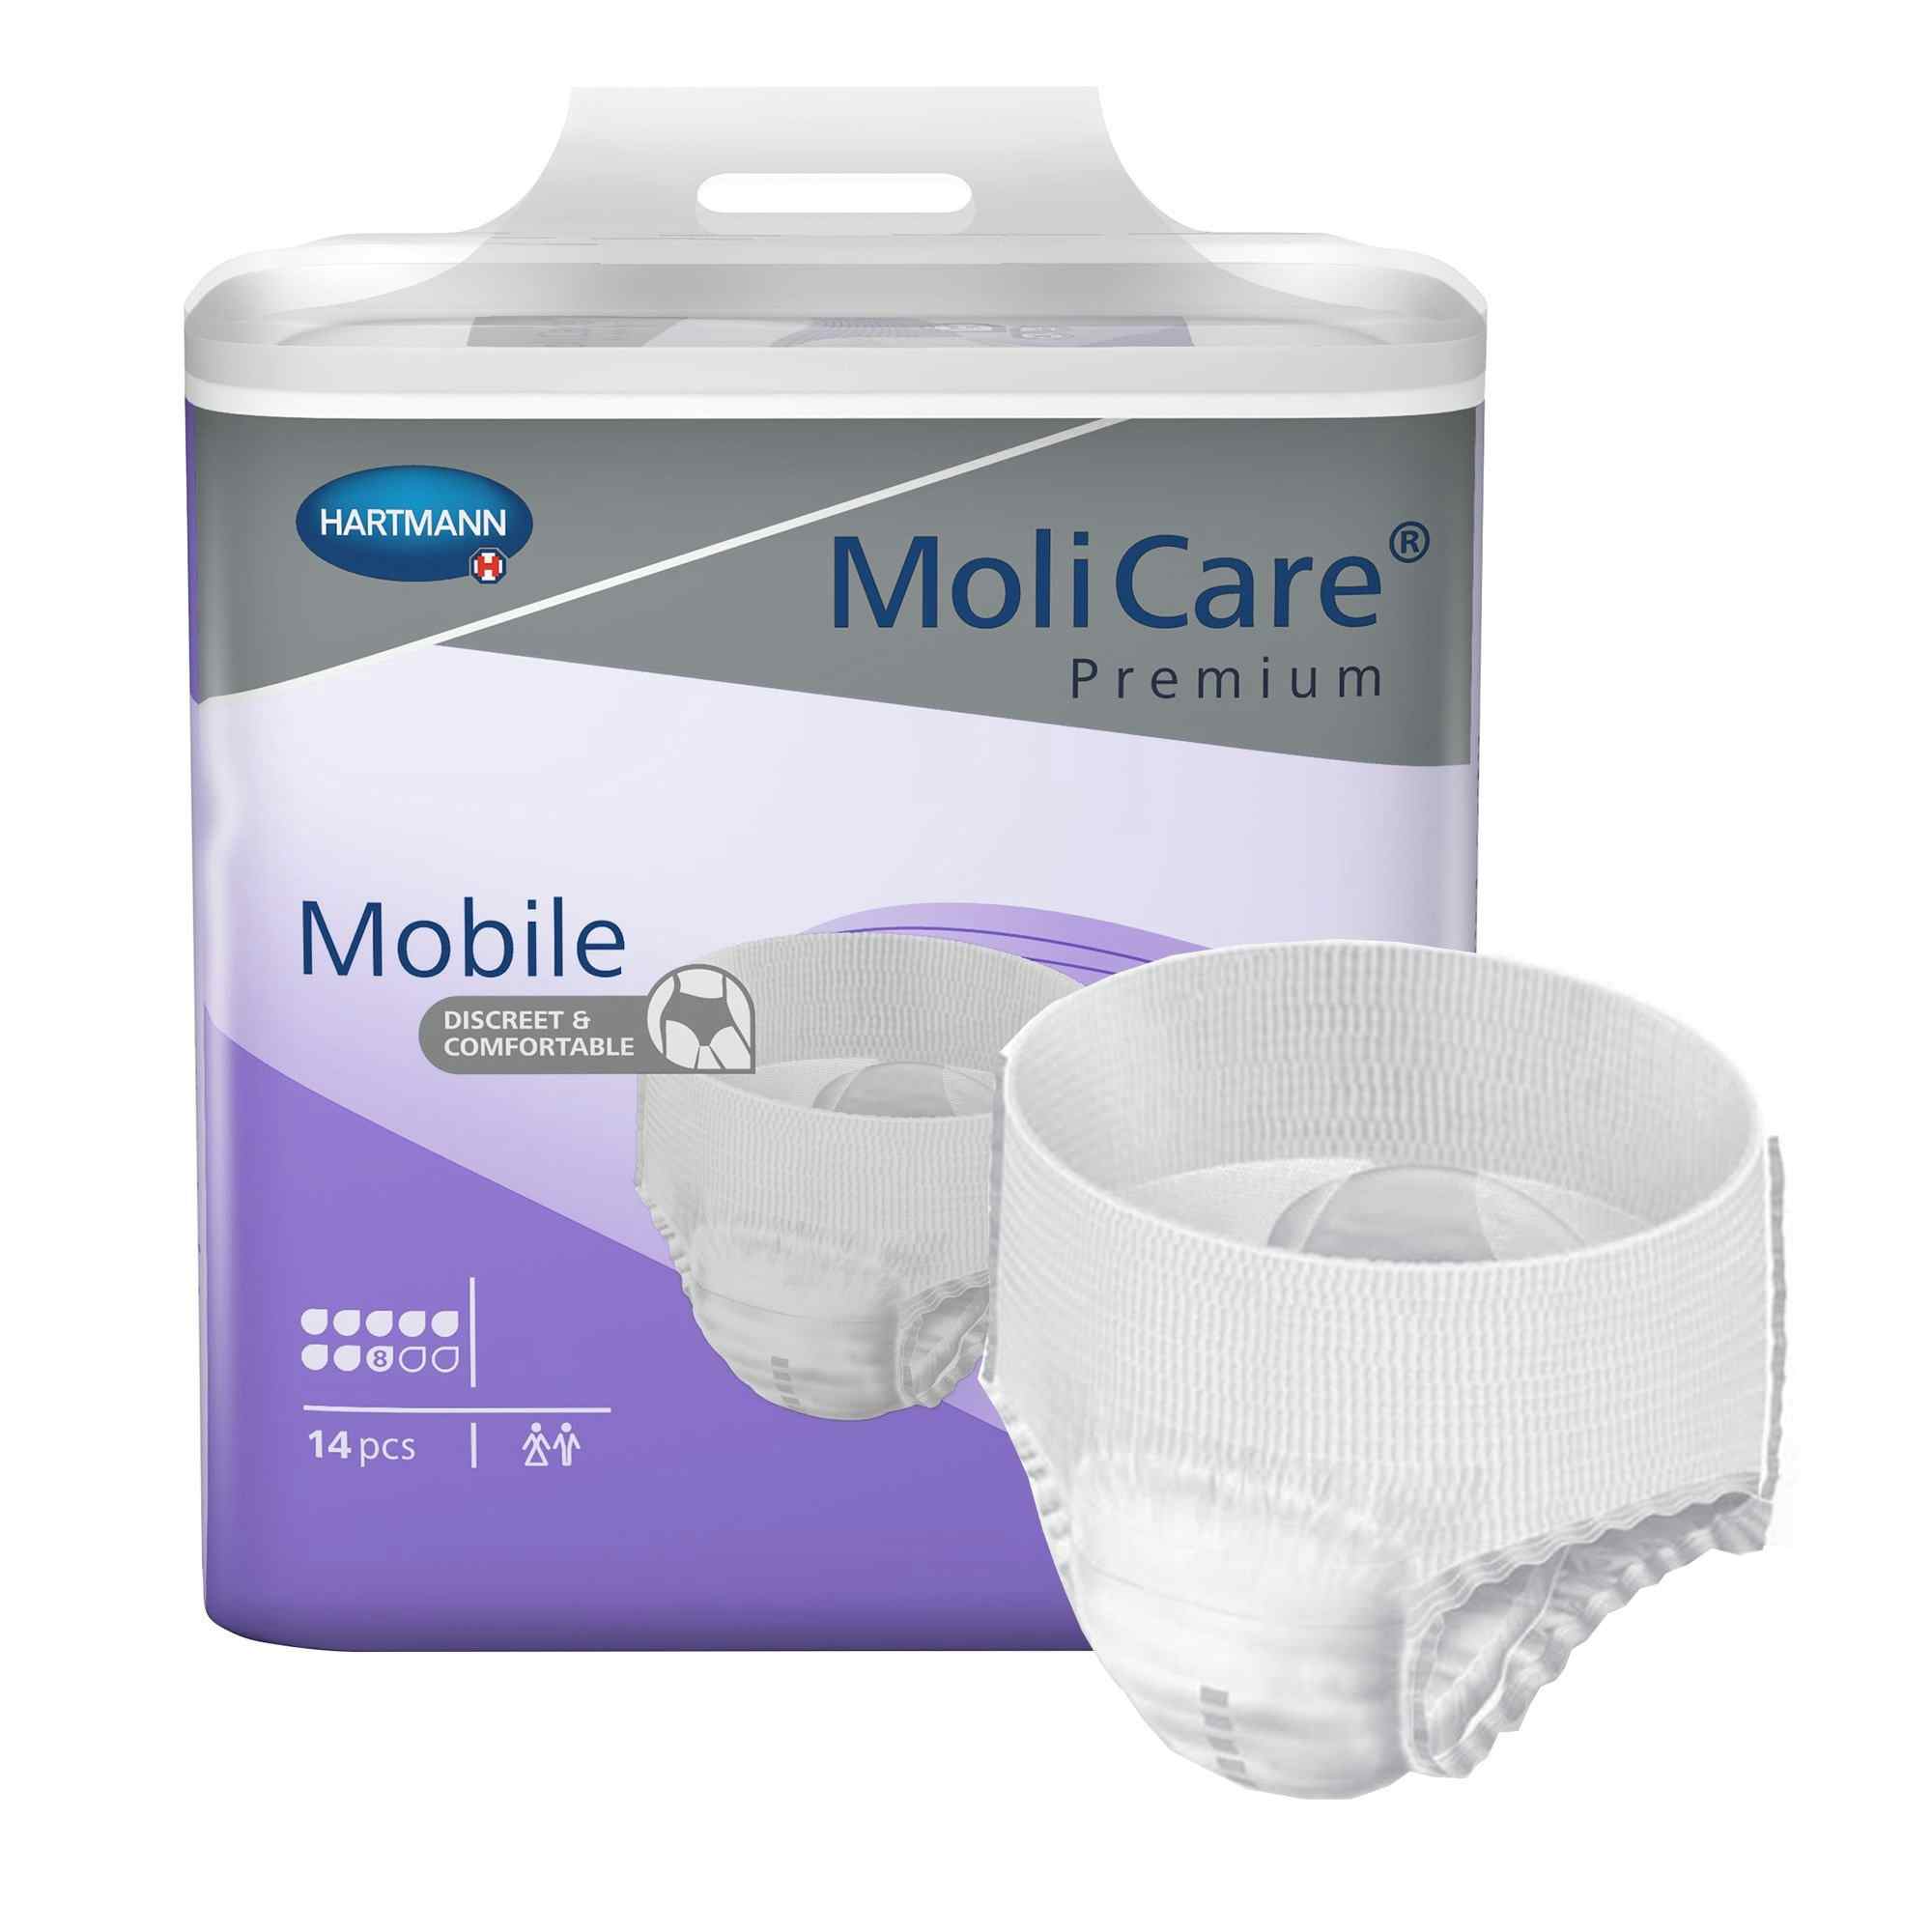 MoliCare Premium Mobile Pull-Up Underwear, 8 Drops Heavy Absorbency, 915873, Large (39-59") - Case of 56